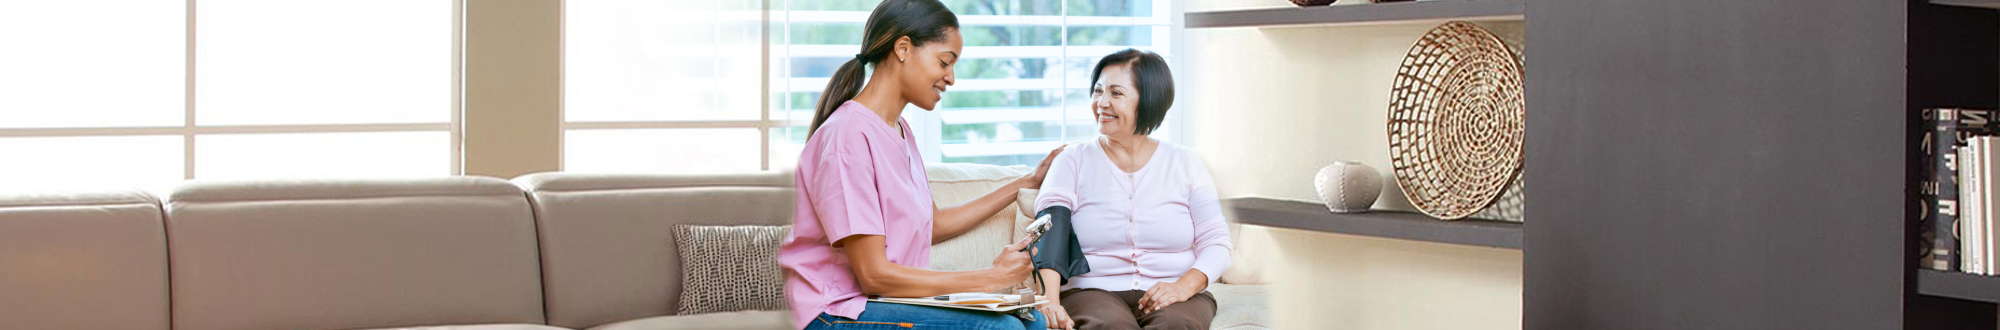 nurse checking blood pressure of the woman